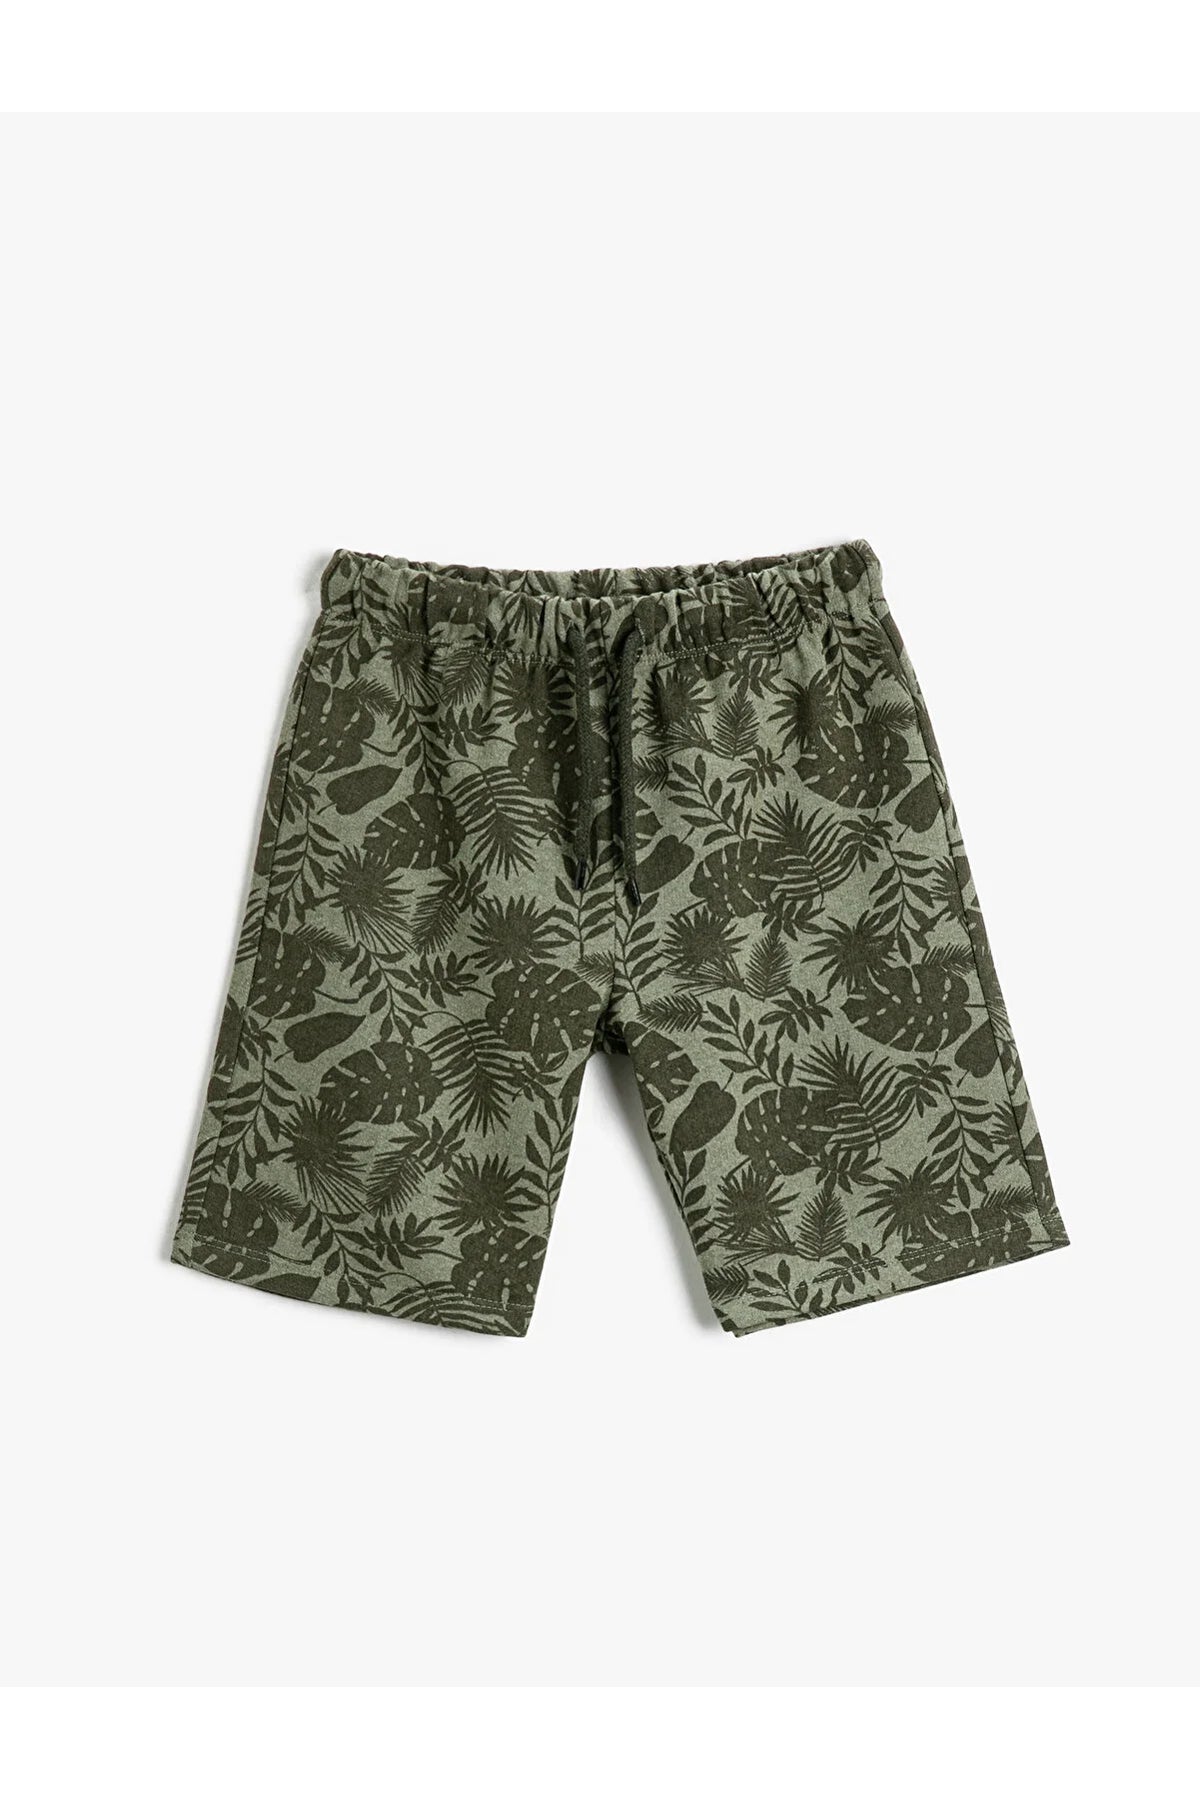 Koton Boy's Palm Tree Patterned Above Knee With Tie Waist  Shorts